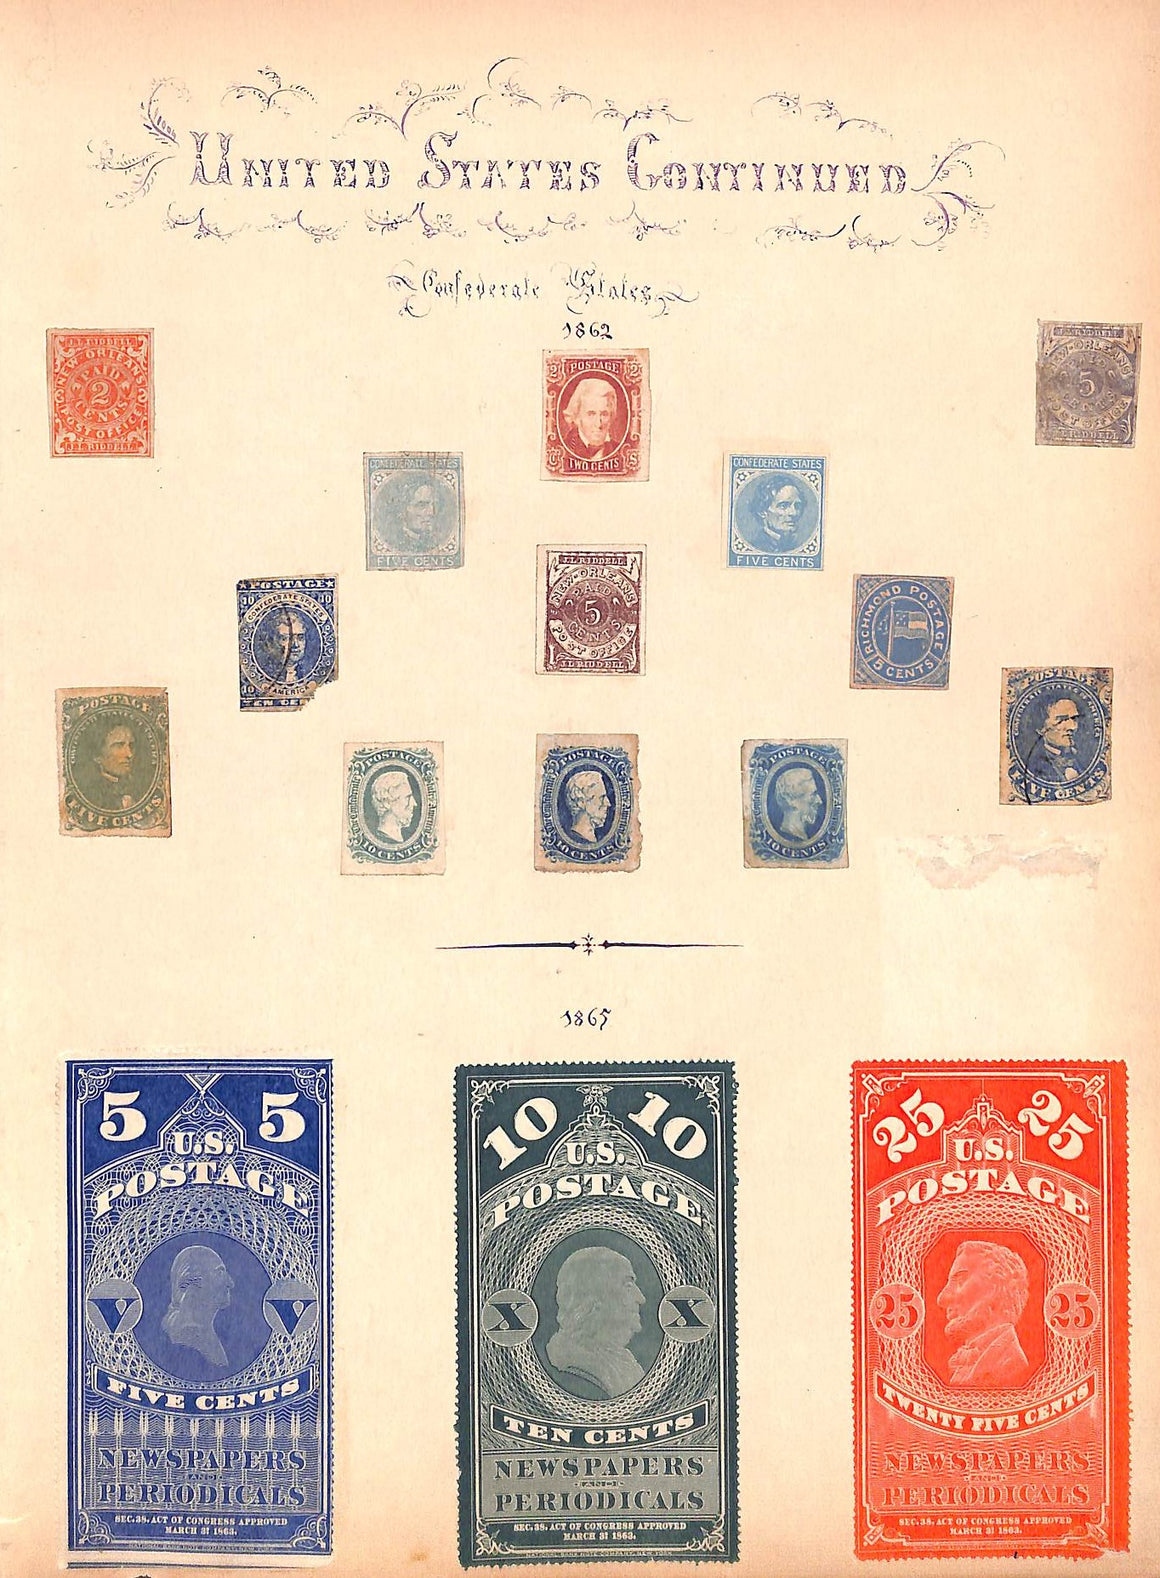 US Postage Stamps 1862 & 1865 (SOLD)